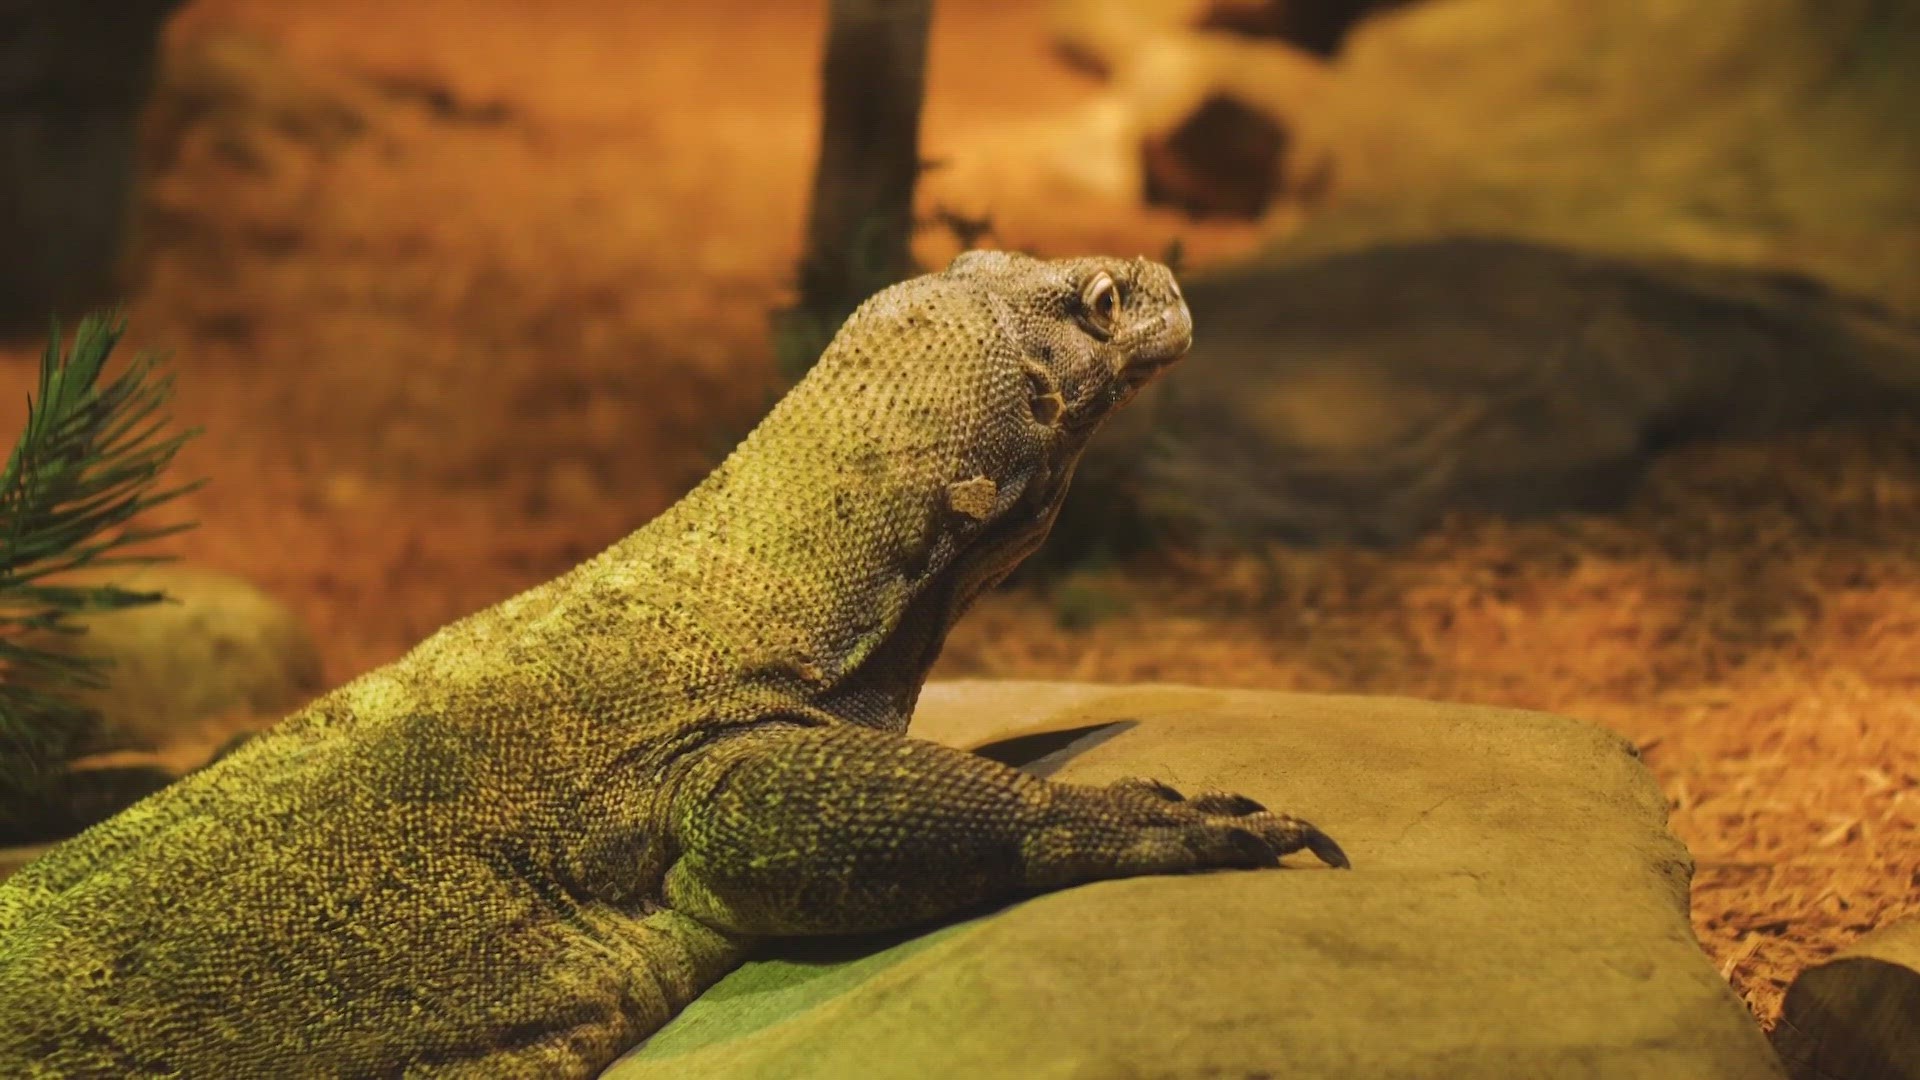 Akron Zoo officials say that most of the employee's injuries were from a bite wound inflicted by the Komodo dragon.